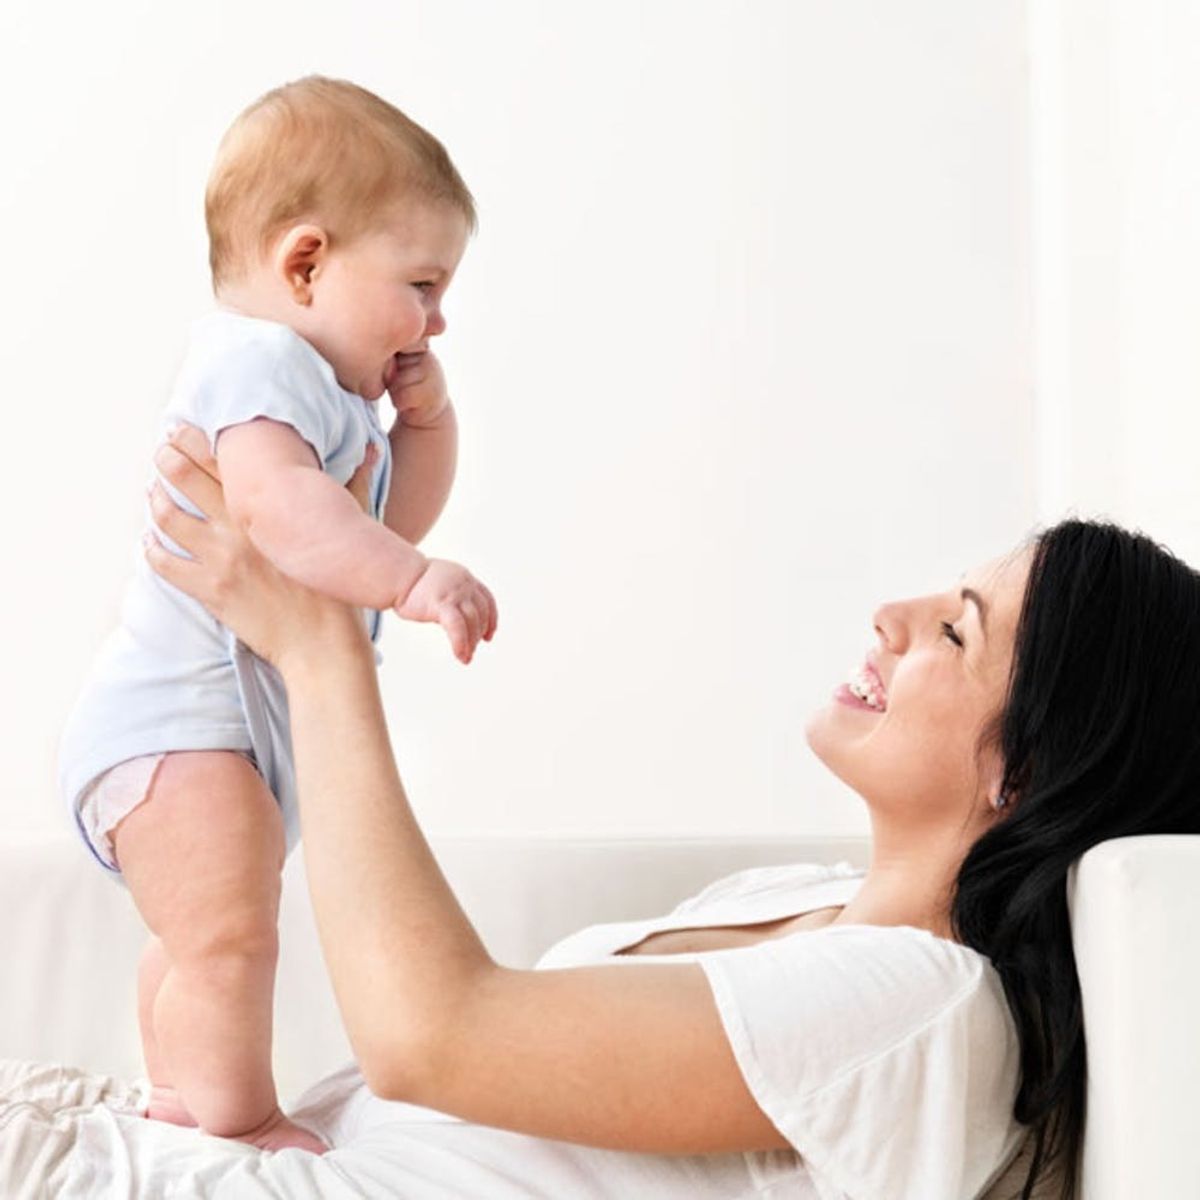 5 Easy Ways to Hold Your Baby to Help Them Get Stronger